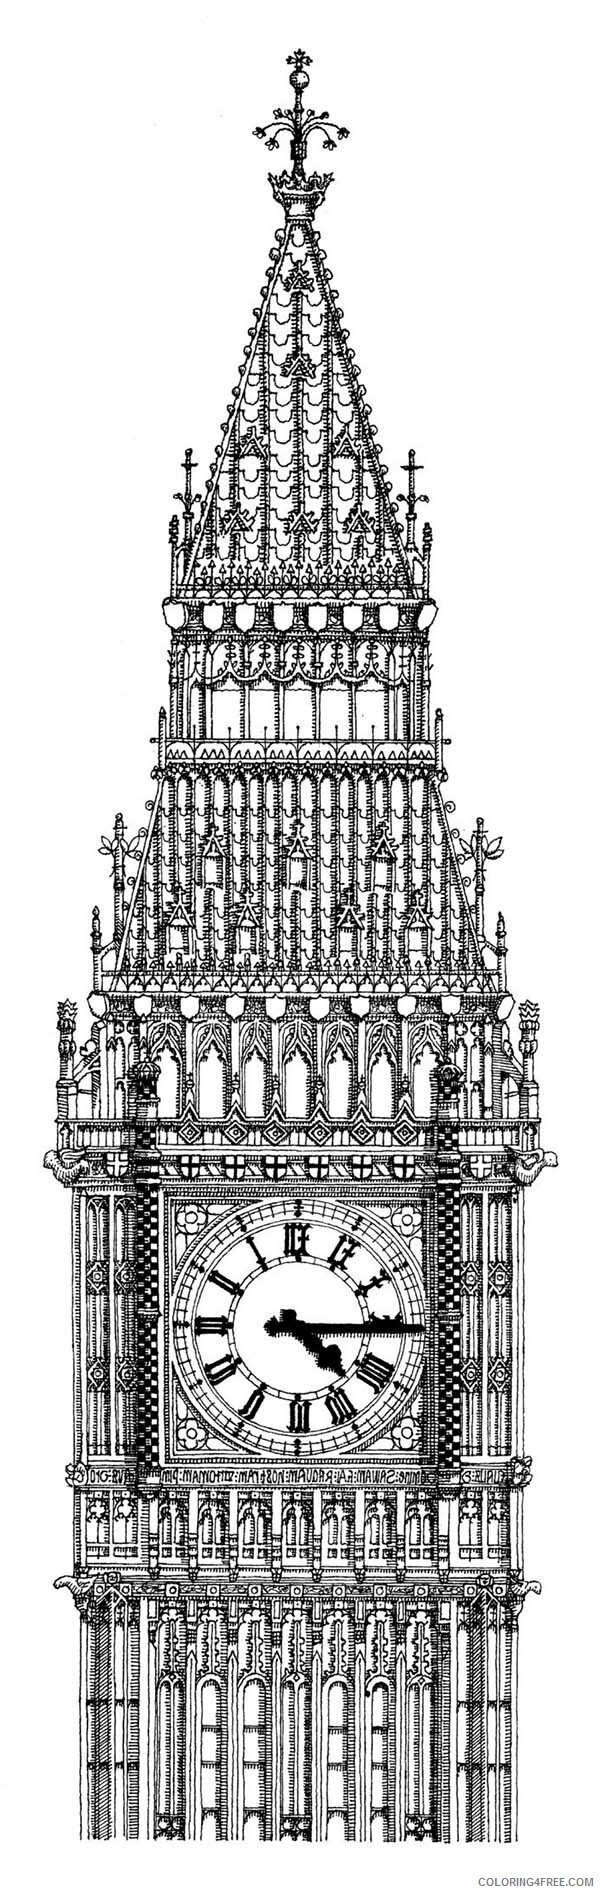 Big Ben Coloring Pages The bell is Housed within the Elizabeth Tower 2021 Coloring4free